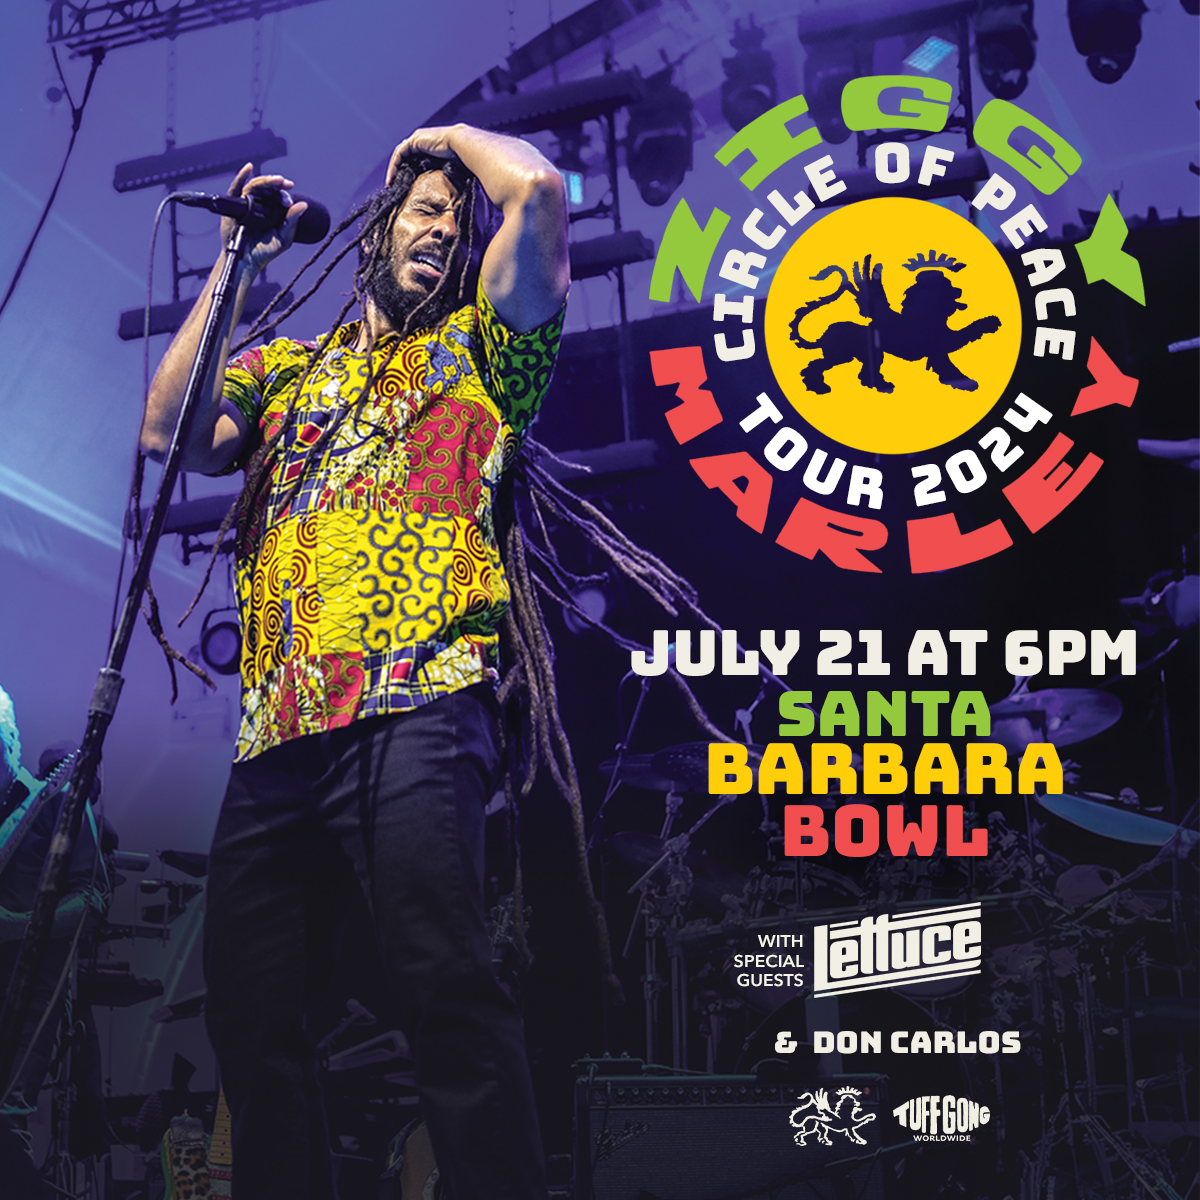 📣 Ziggy Marley 'Circle of Peace Tour' is coming to @sbbowl on 7/21! Special guests: Lettuce & DonCarlos 🎟️ Tix on sale: 3/22 @ 10am 🎟️ Buy at Bowl Box Office or sbbowl.com 🎶 Bowl news & info: sbbowl.com #ZiggyMarley #SBBowl #SBBowlSeason2024